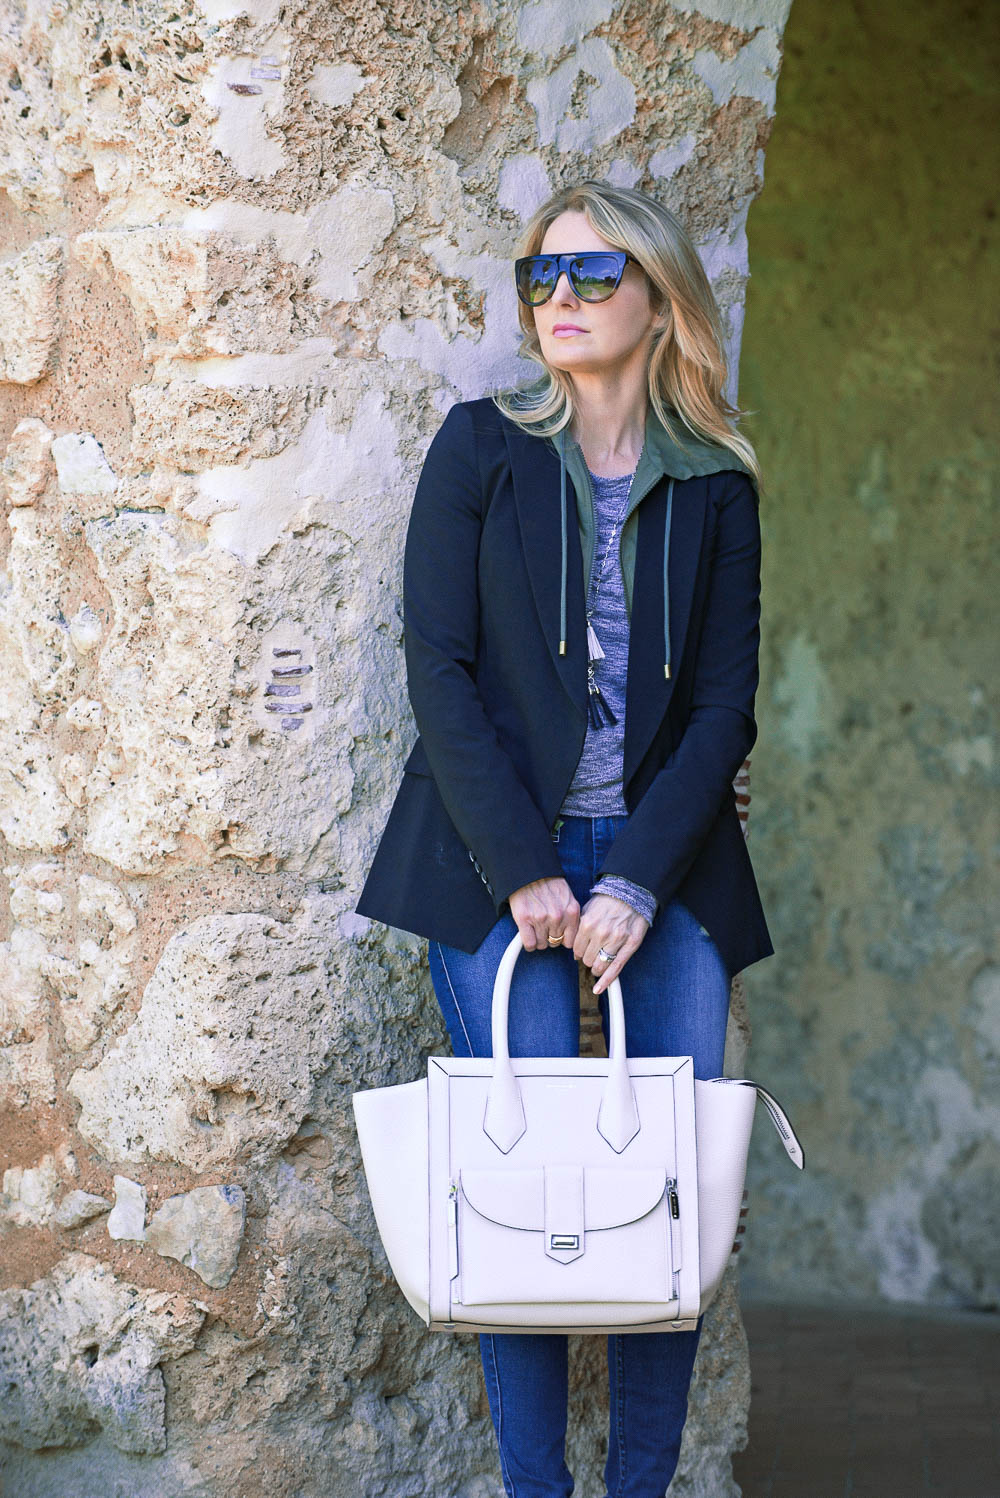 White bags, these white handbags, hand-picked by Erin Busbee, Fashion Blogger and YouTuber for busy women over 40, are from Henri Bendel. They are versatile, neutral...perfect everyday handbags!